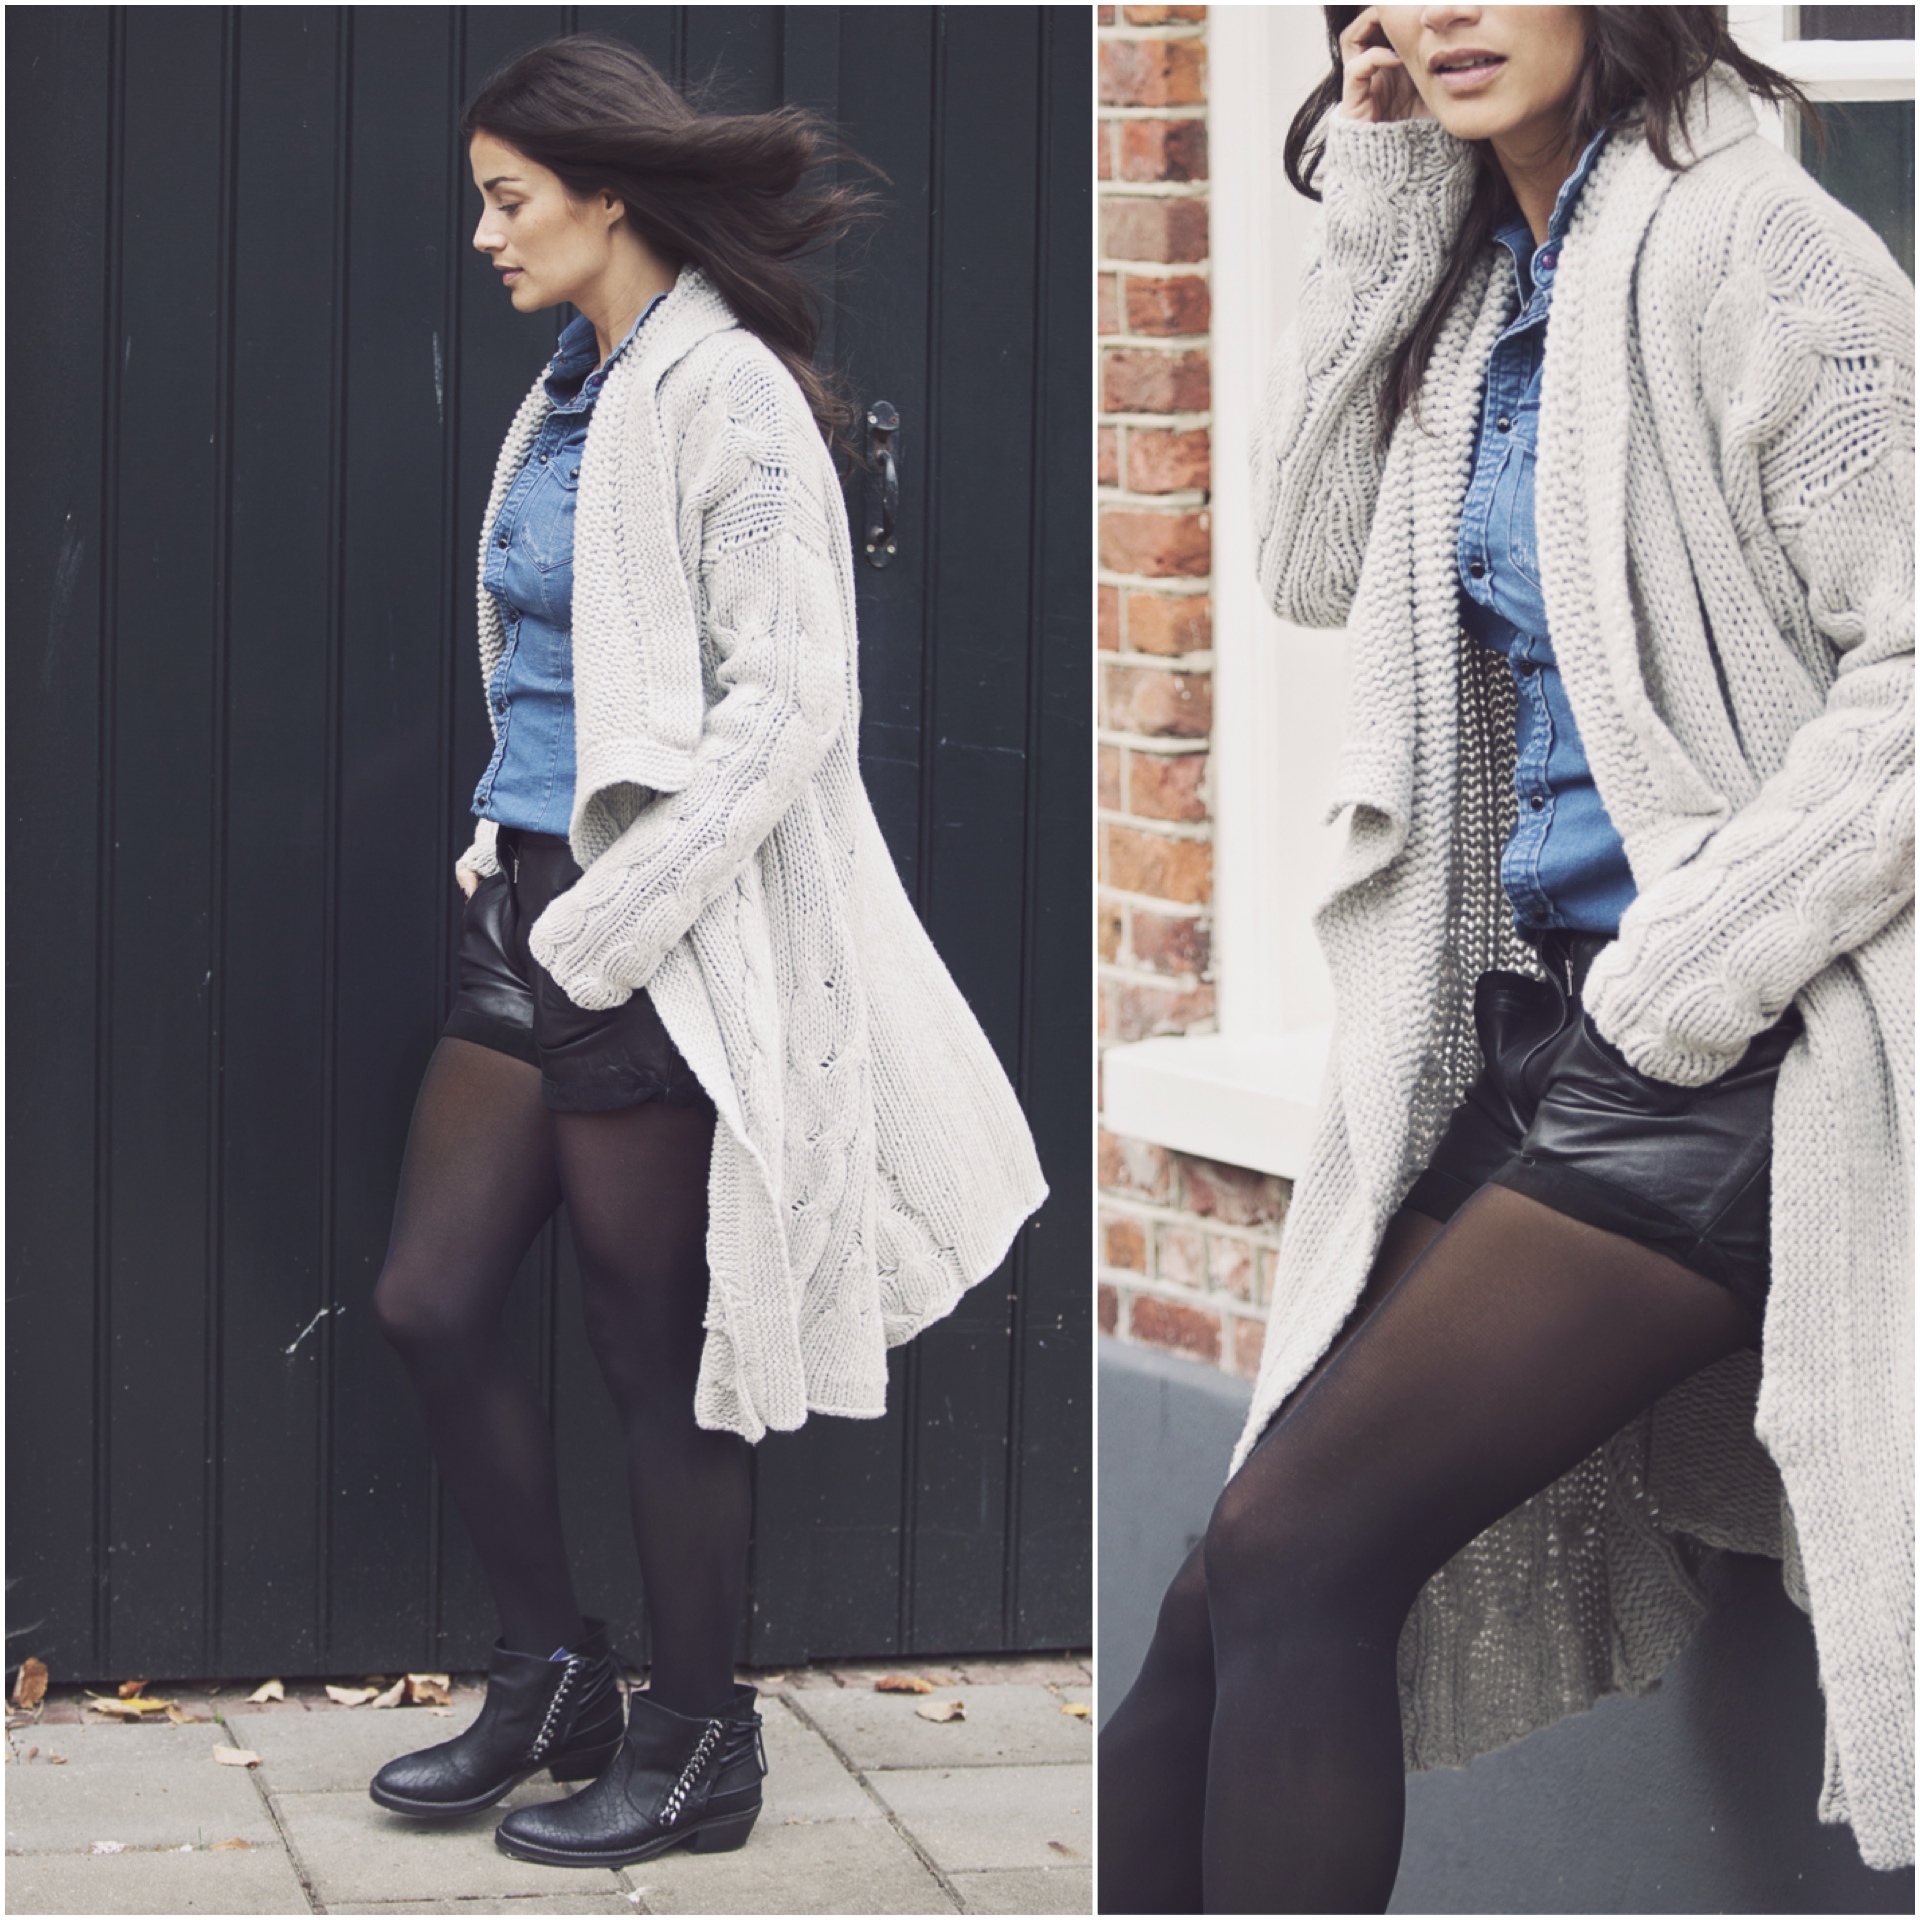 streetstyle autumn 2014 how to wear leather shorts blogforshops